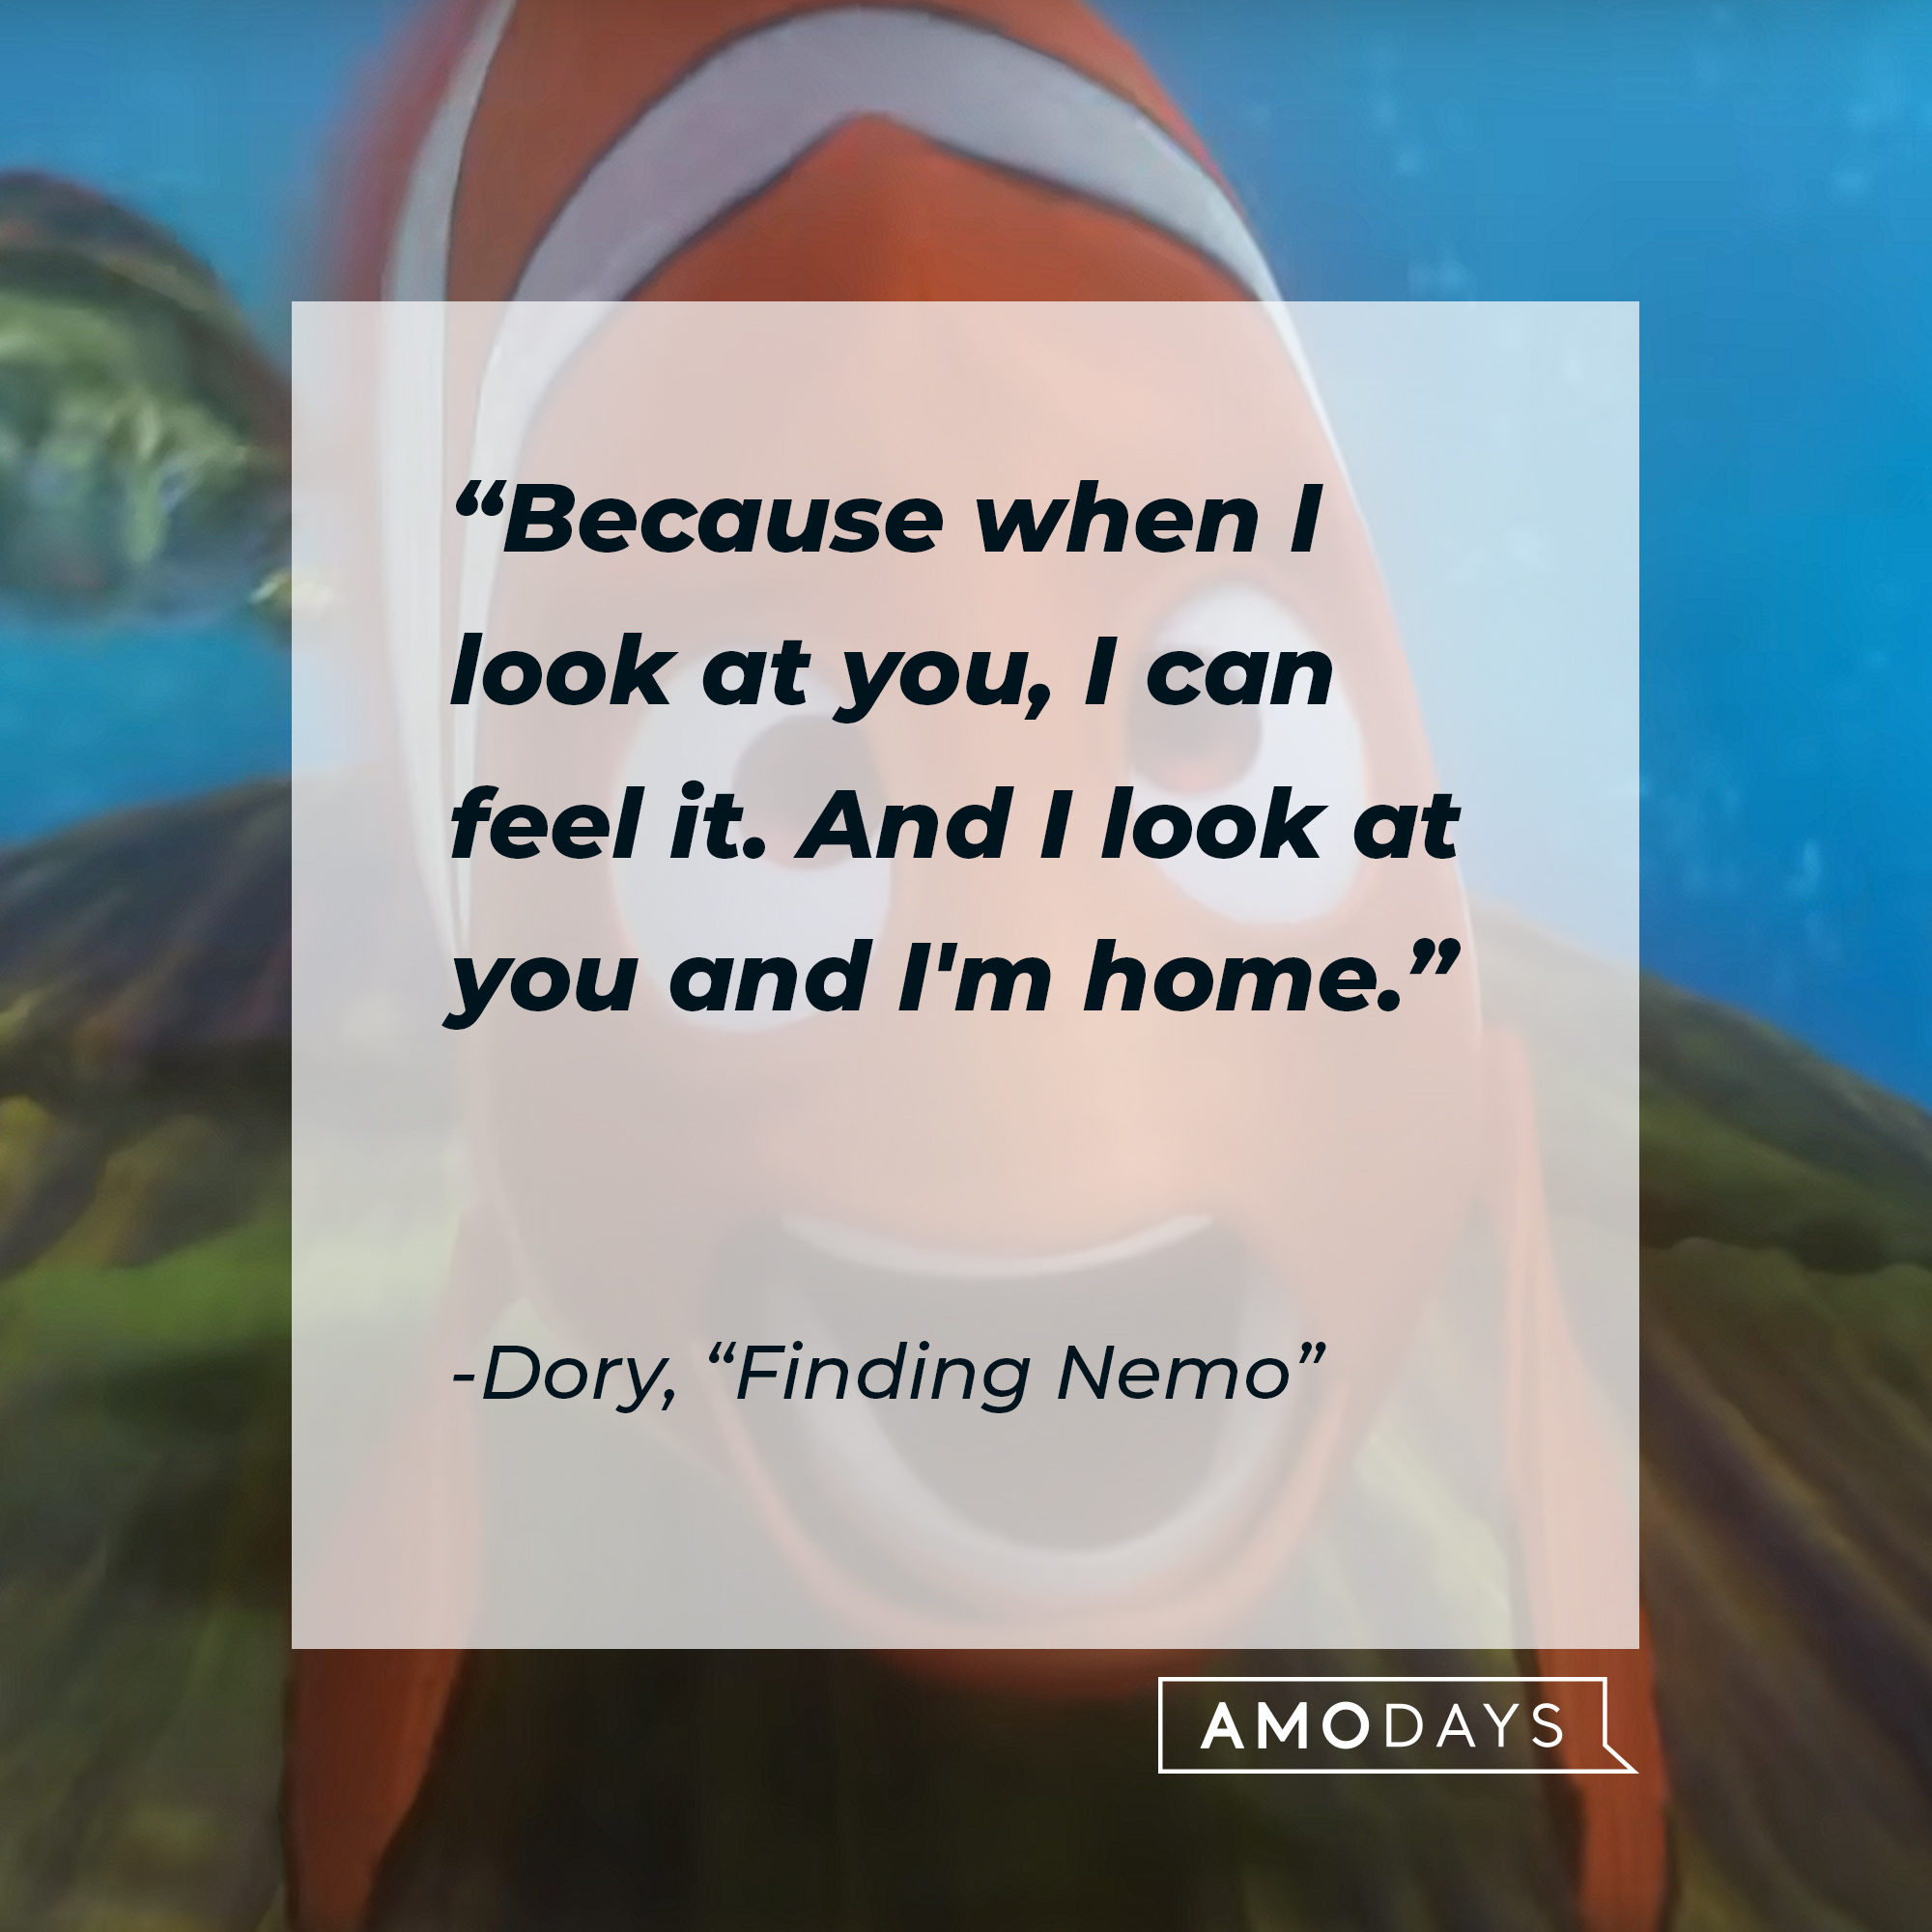 Dory's "Finding Nemo" quote: "Because when I look at you, I can feel it. And I look at you and I'm home." | Source: Youtube.com/pixar